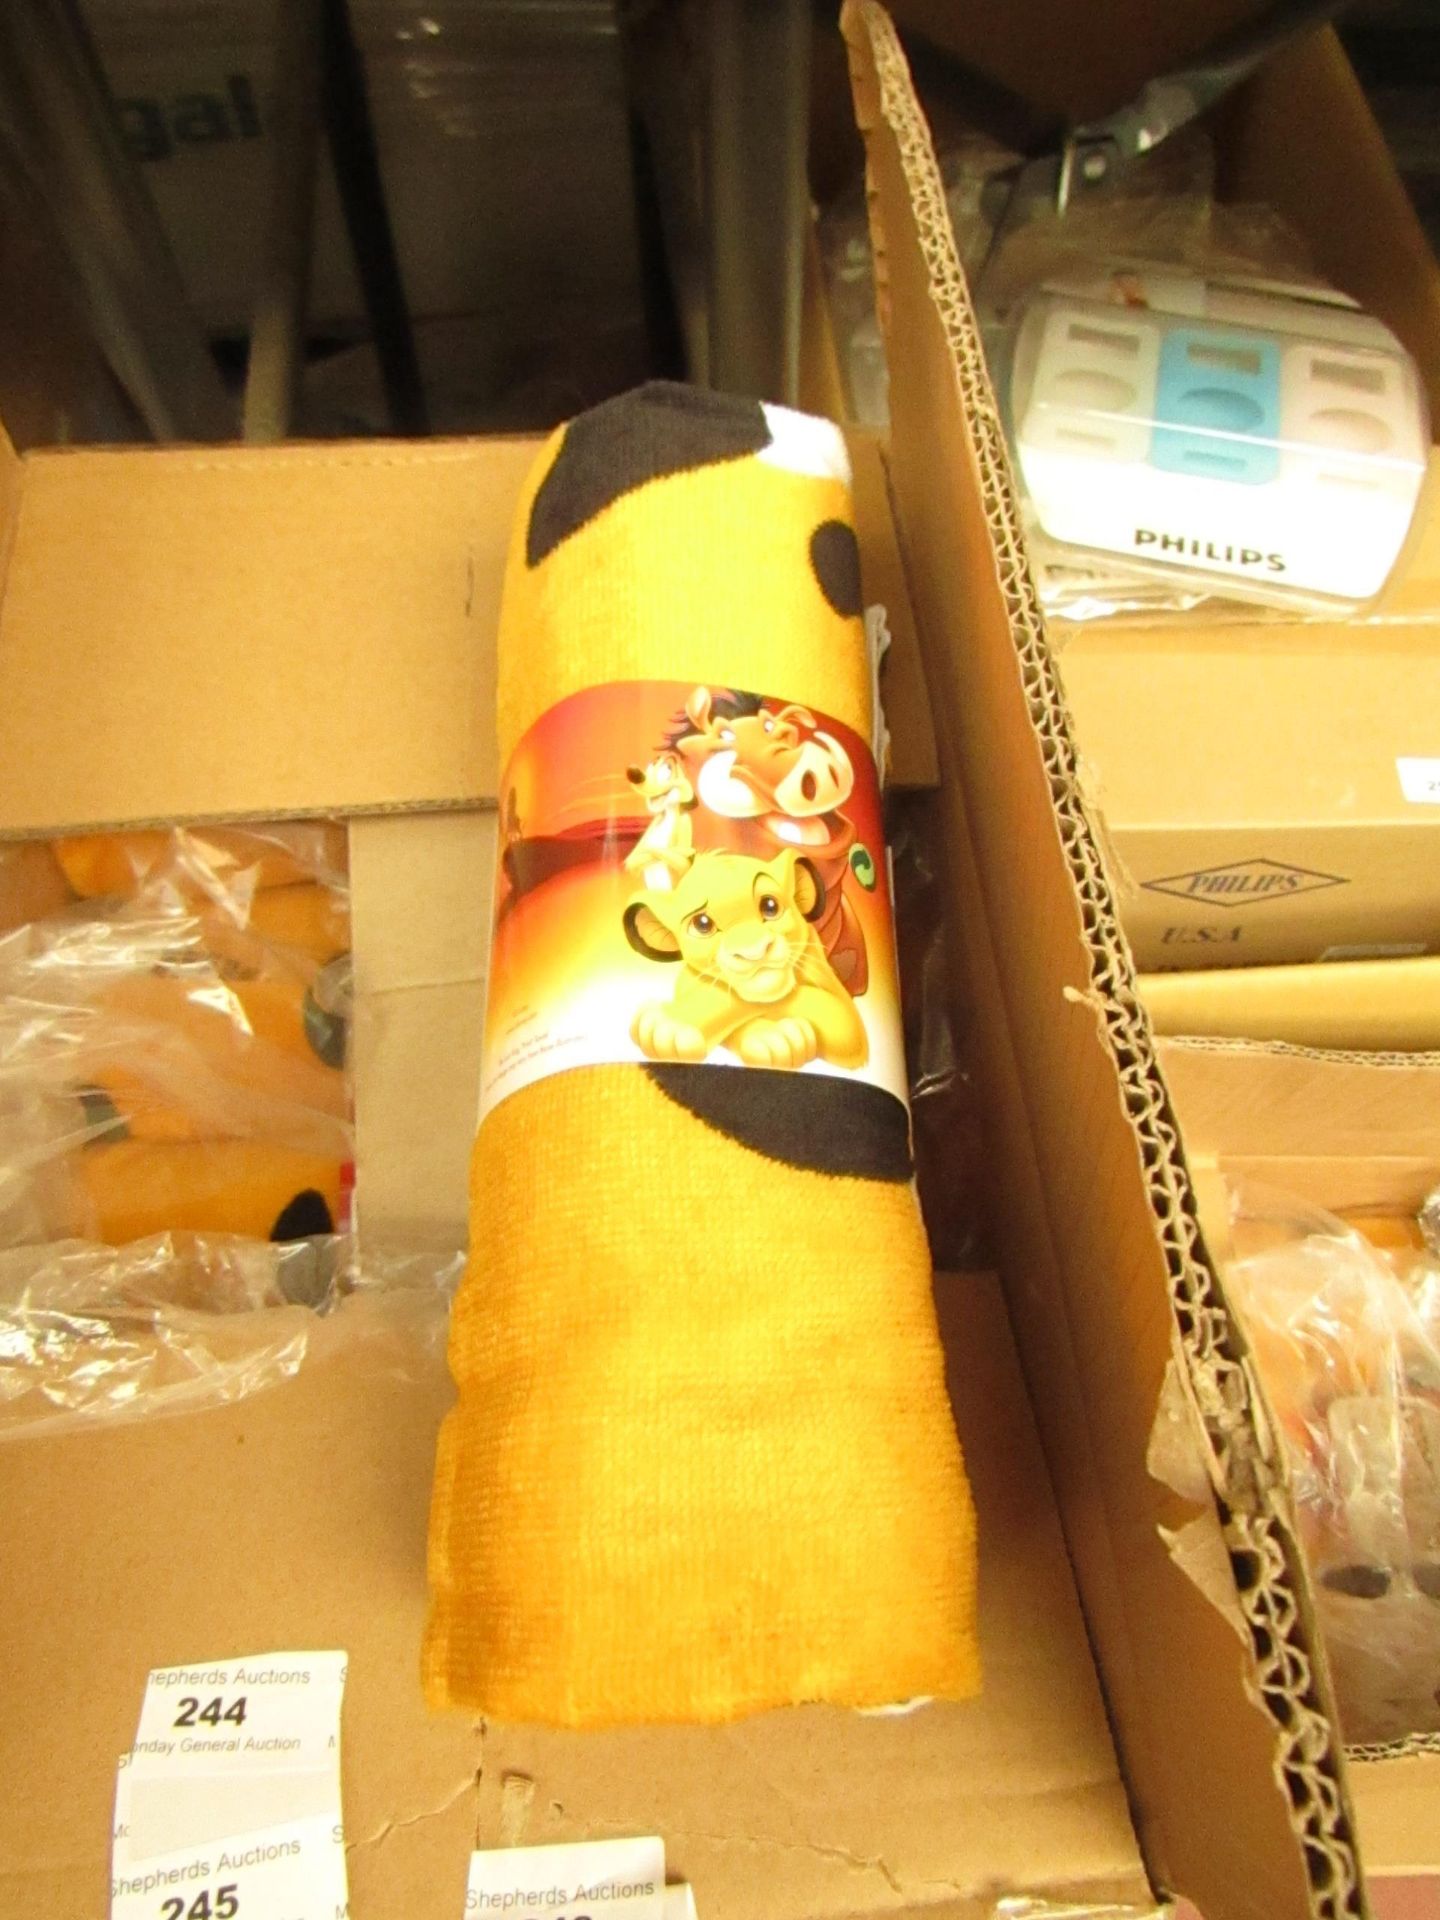 Lion King printed towel 70 x 140cm, new and packaged.